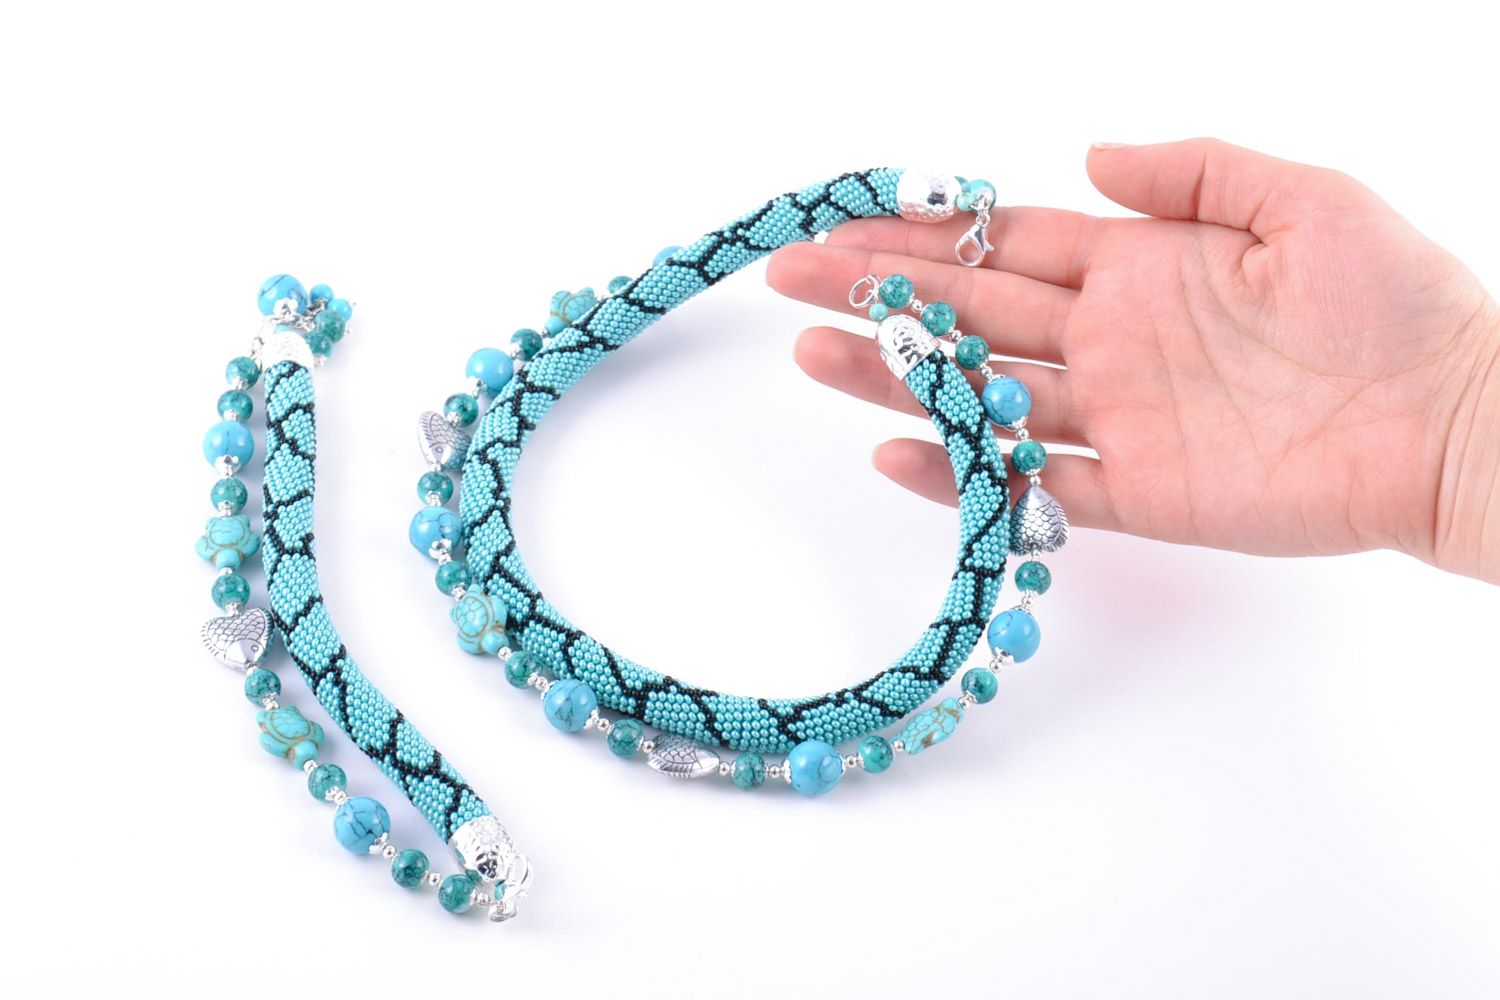 Handmade beaded jewelry set with natural turquoise stone 2 items beaded cord necklace and bracelet photo 2